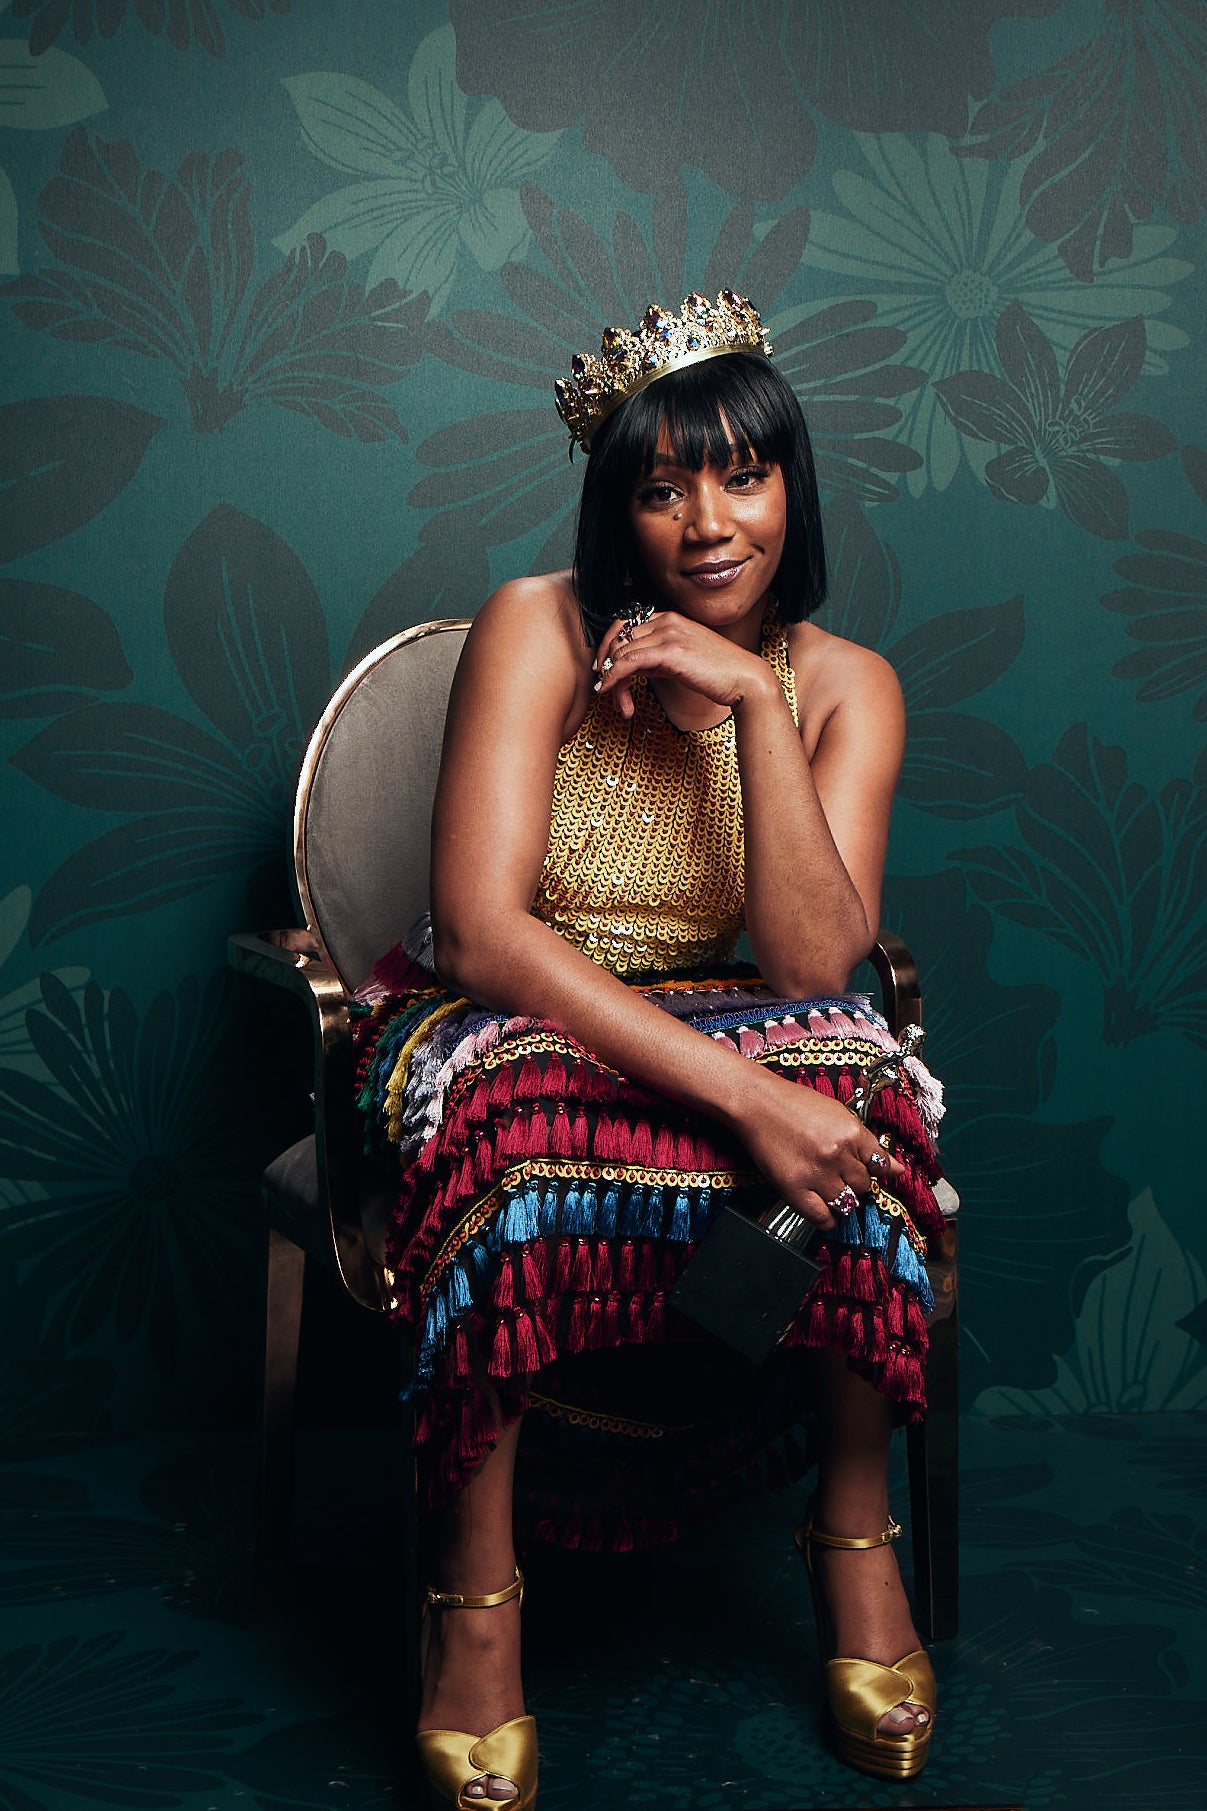 Tiffany Haddish Is Down To Host The Oscars, But She Isn't Doing It For Free
